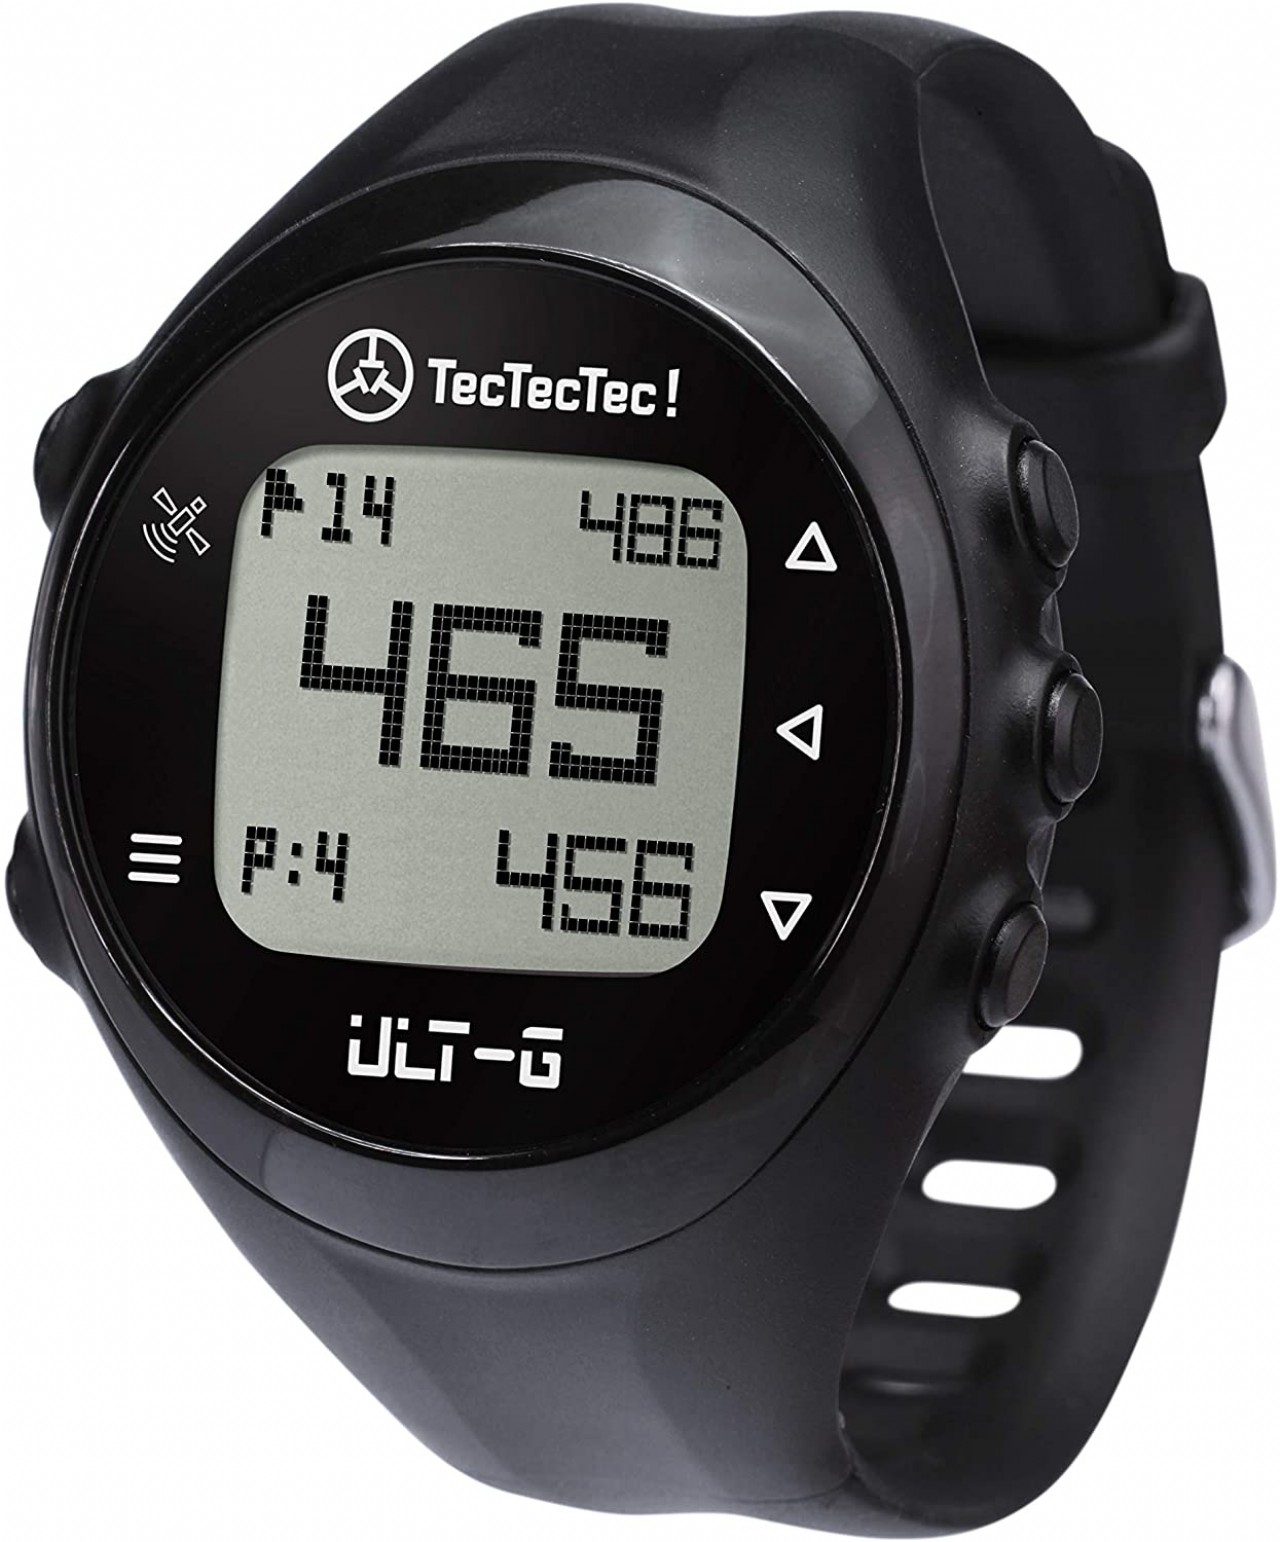 TecTecTec ULT-G Golf GPS Watch, Preloaded Worldwide Courses, Lightweight, Simple, Easy-to-use Golf